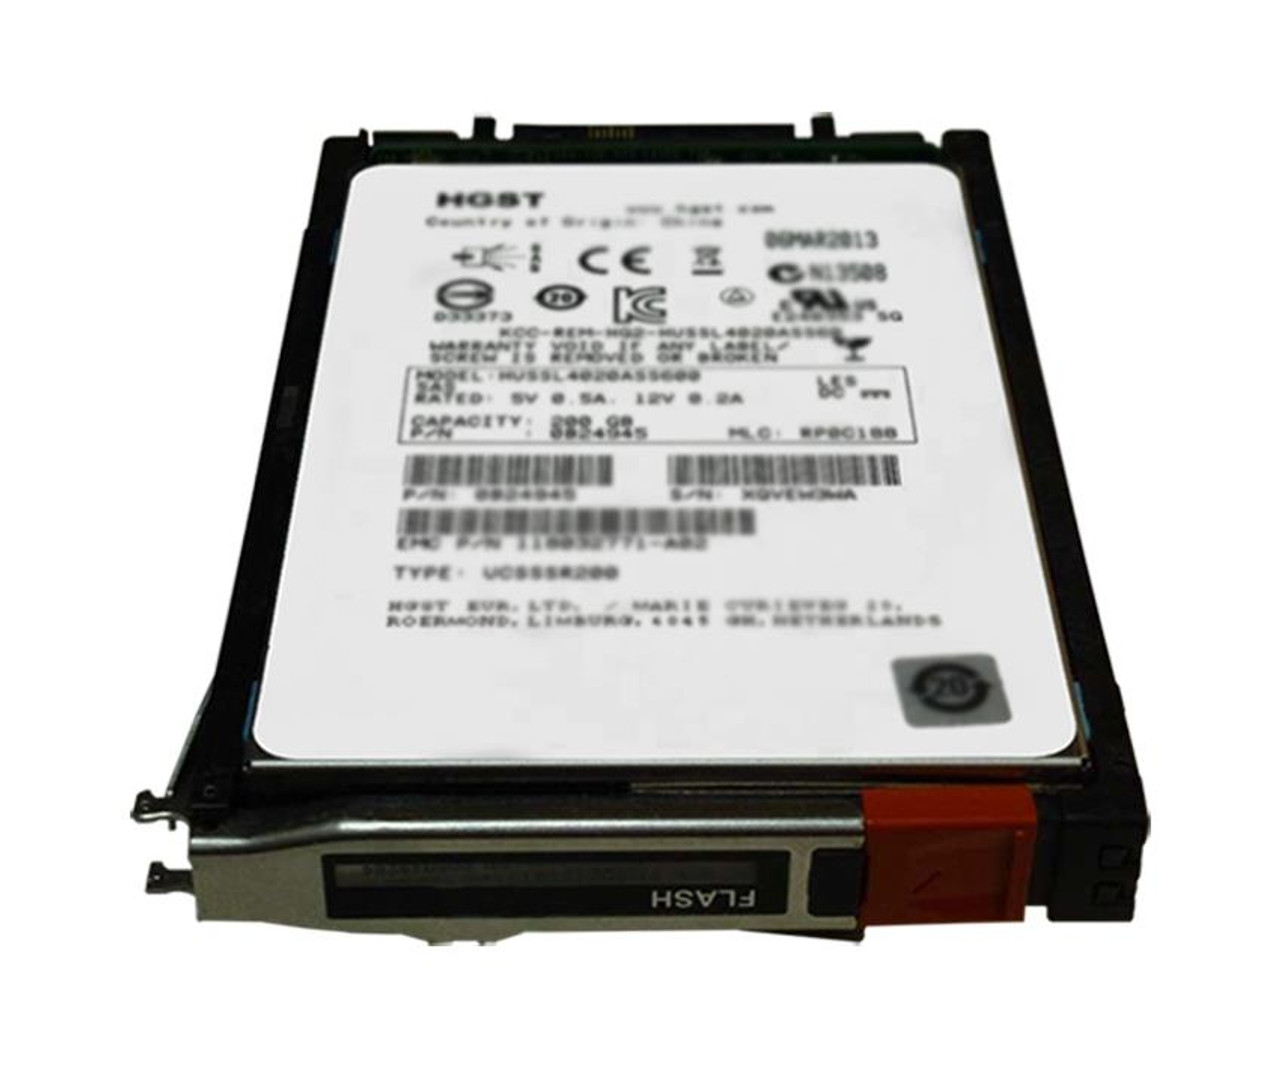 V6-2S6FX-800TU EMC 800GB SAS 6Gbps 2.5-inch Internal Solid State Drive (SSD) Upgrade for VNXe3200 25 x 2.5 Enclosure